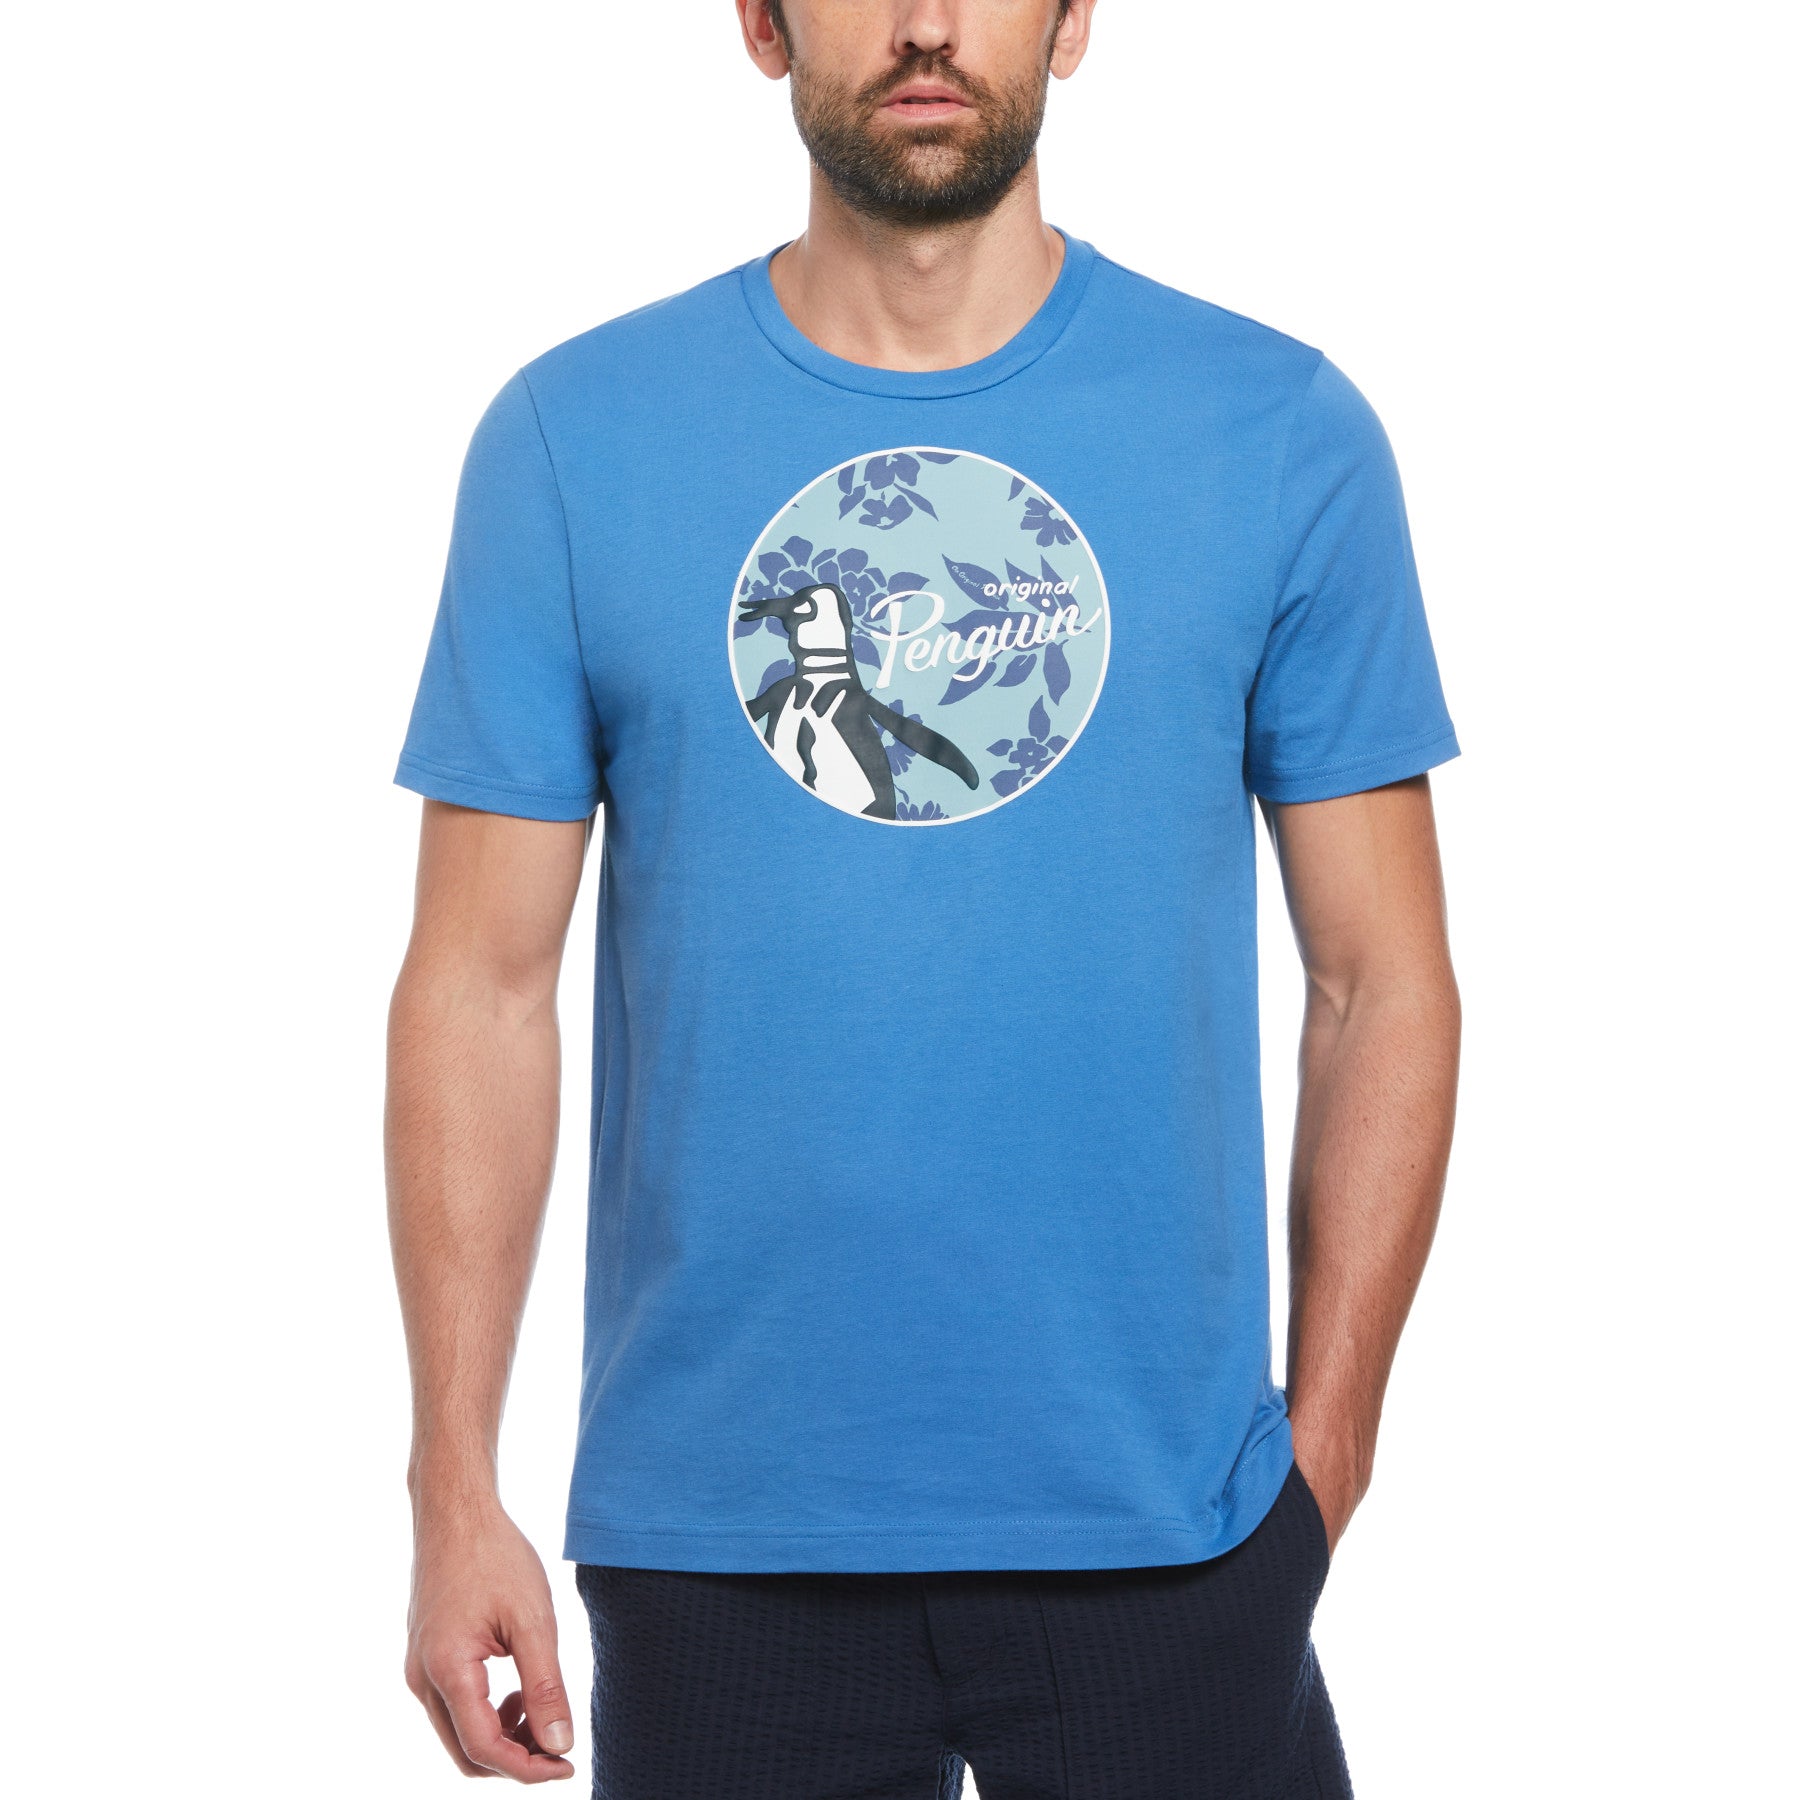 View Original Penguin Floral Fill Pete TShirt In Star Sapphire Blue Mens information